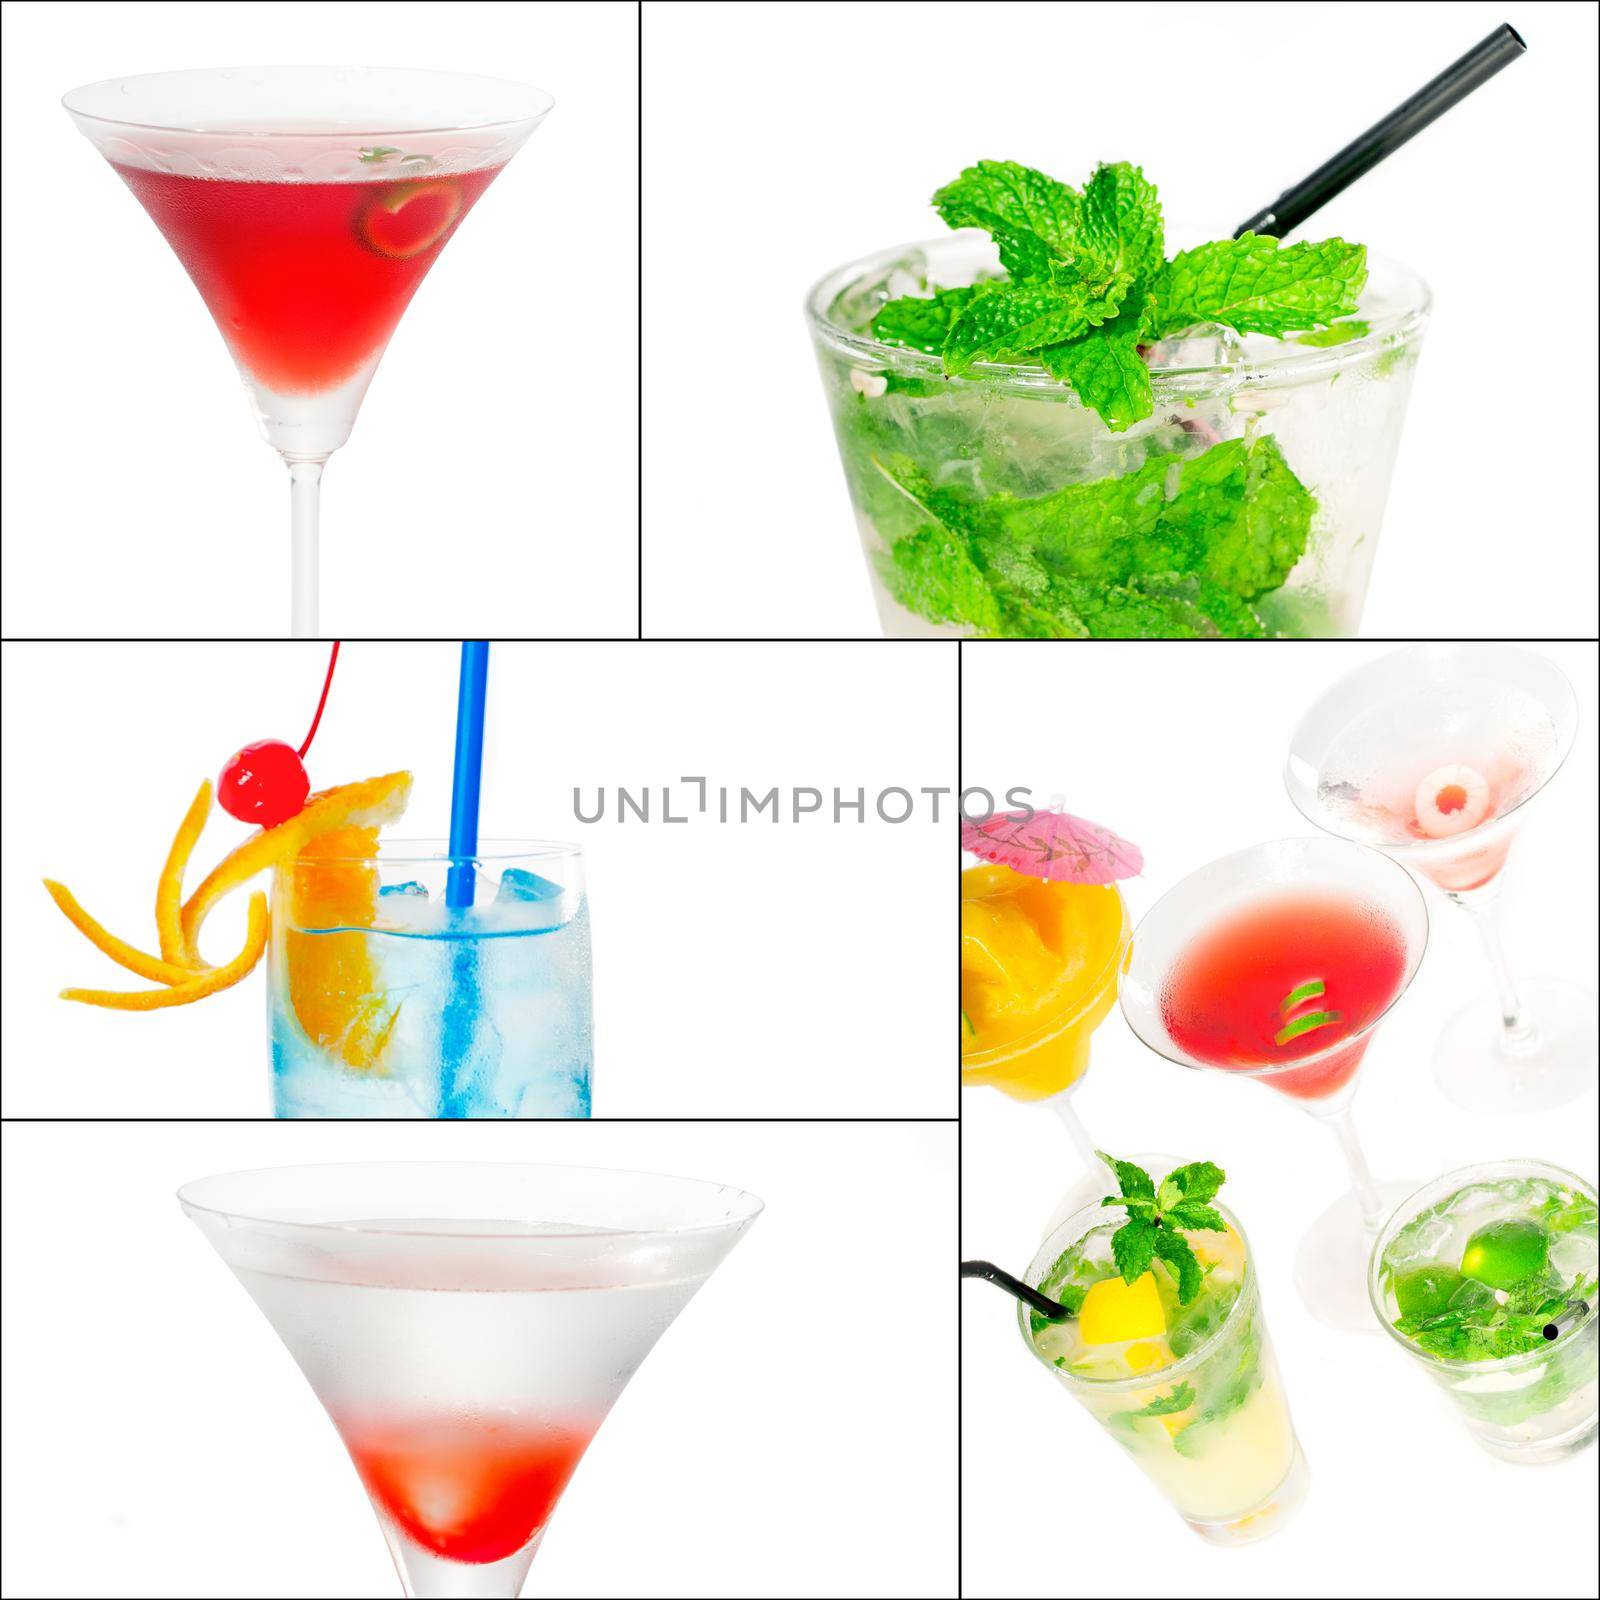 cocktails collage by keko64